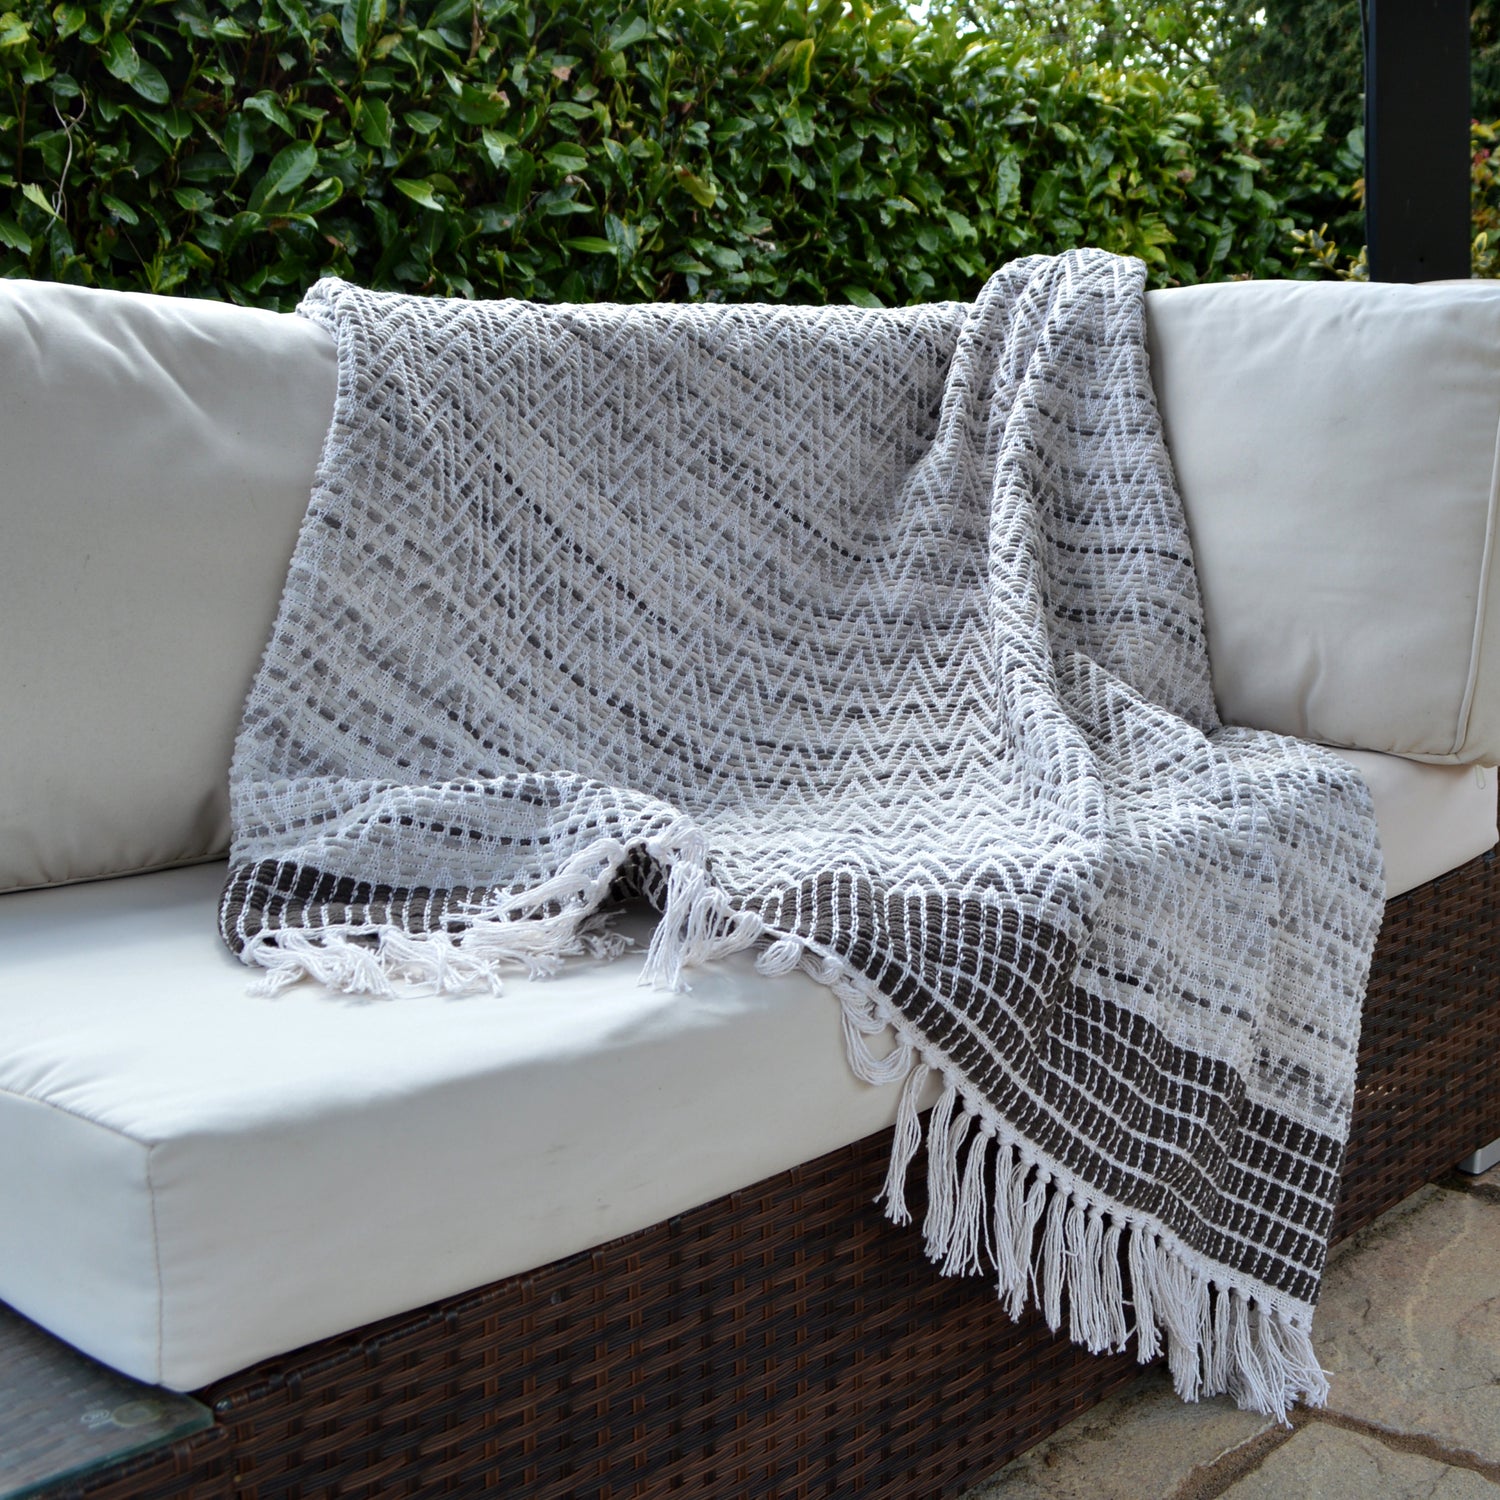 Reimagining Comfort: Stylish Throws Crafted From Recycled Materials